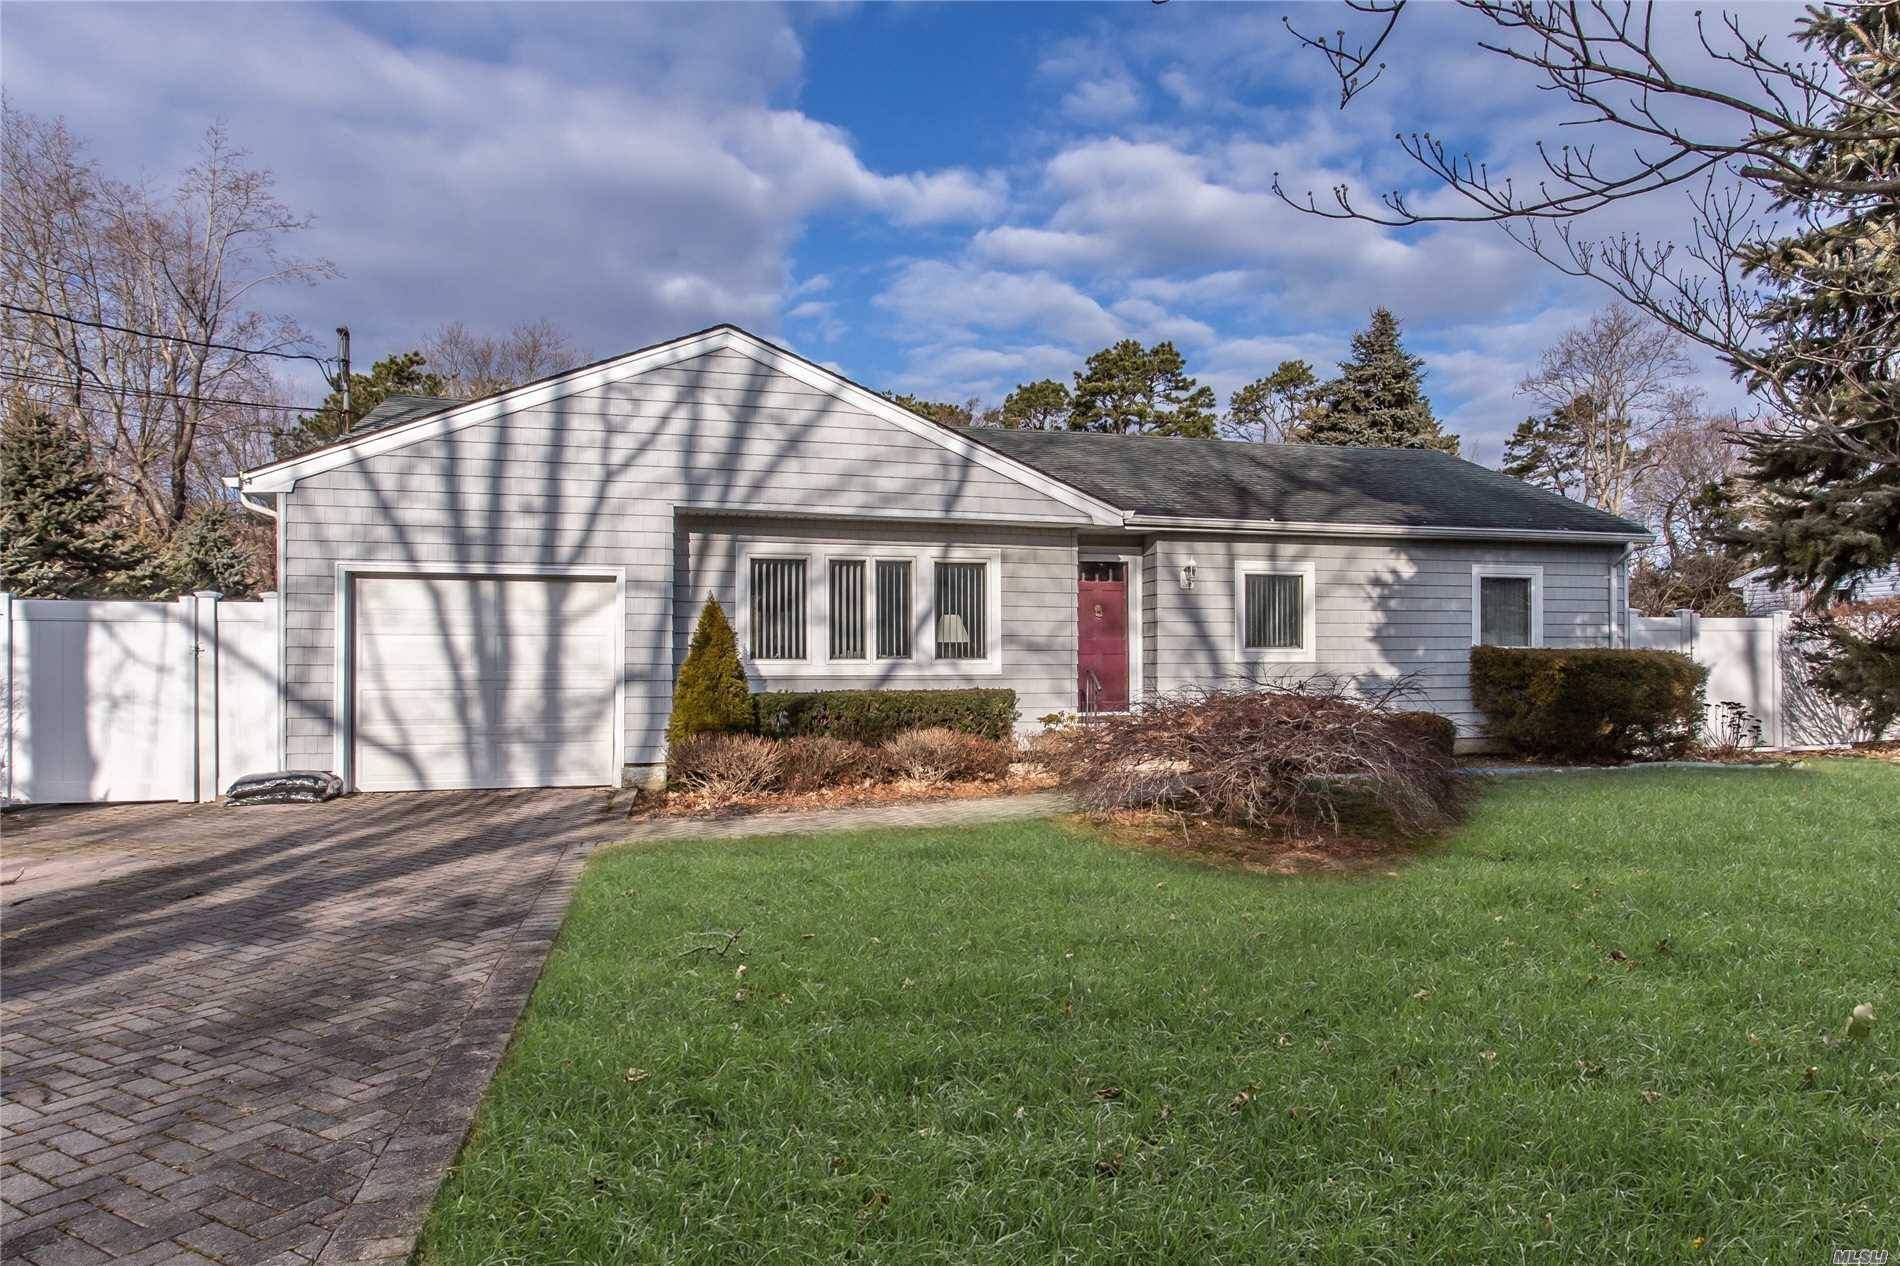 Lovely Three Bedroom Ranch, Featuring Wood Floors, Cac, Igs, Den W Stone Fp, Updated Windows, Vinyl Siding And Screened Porch Overlooking Gorgeous.